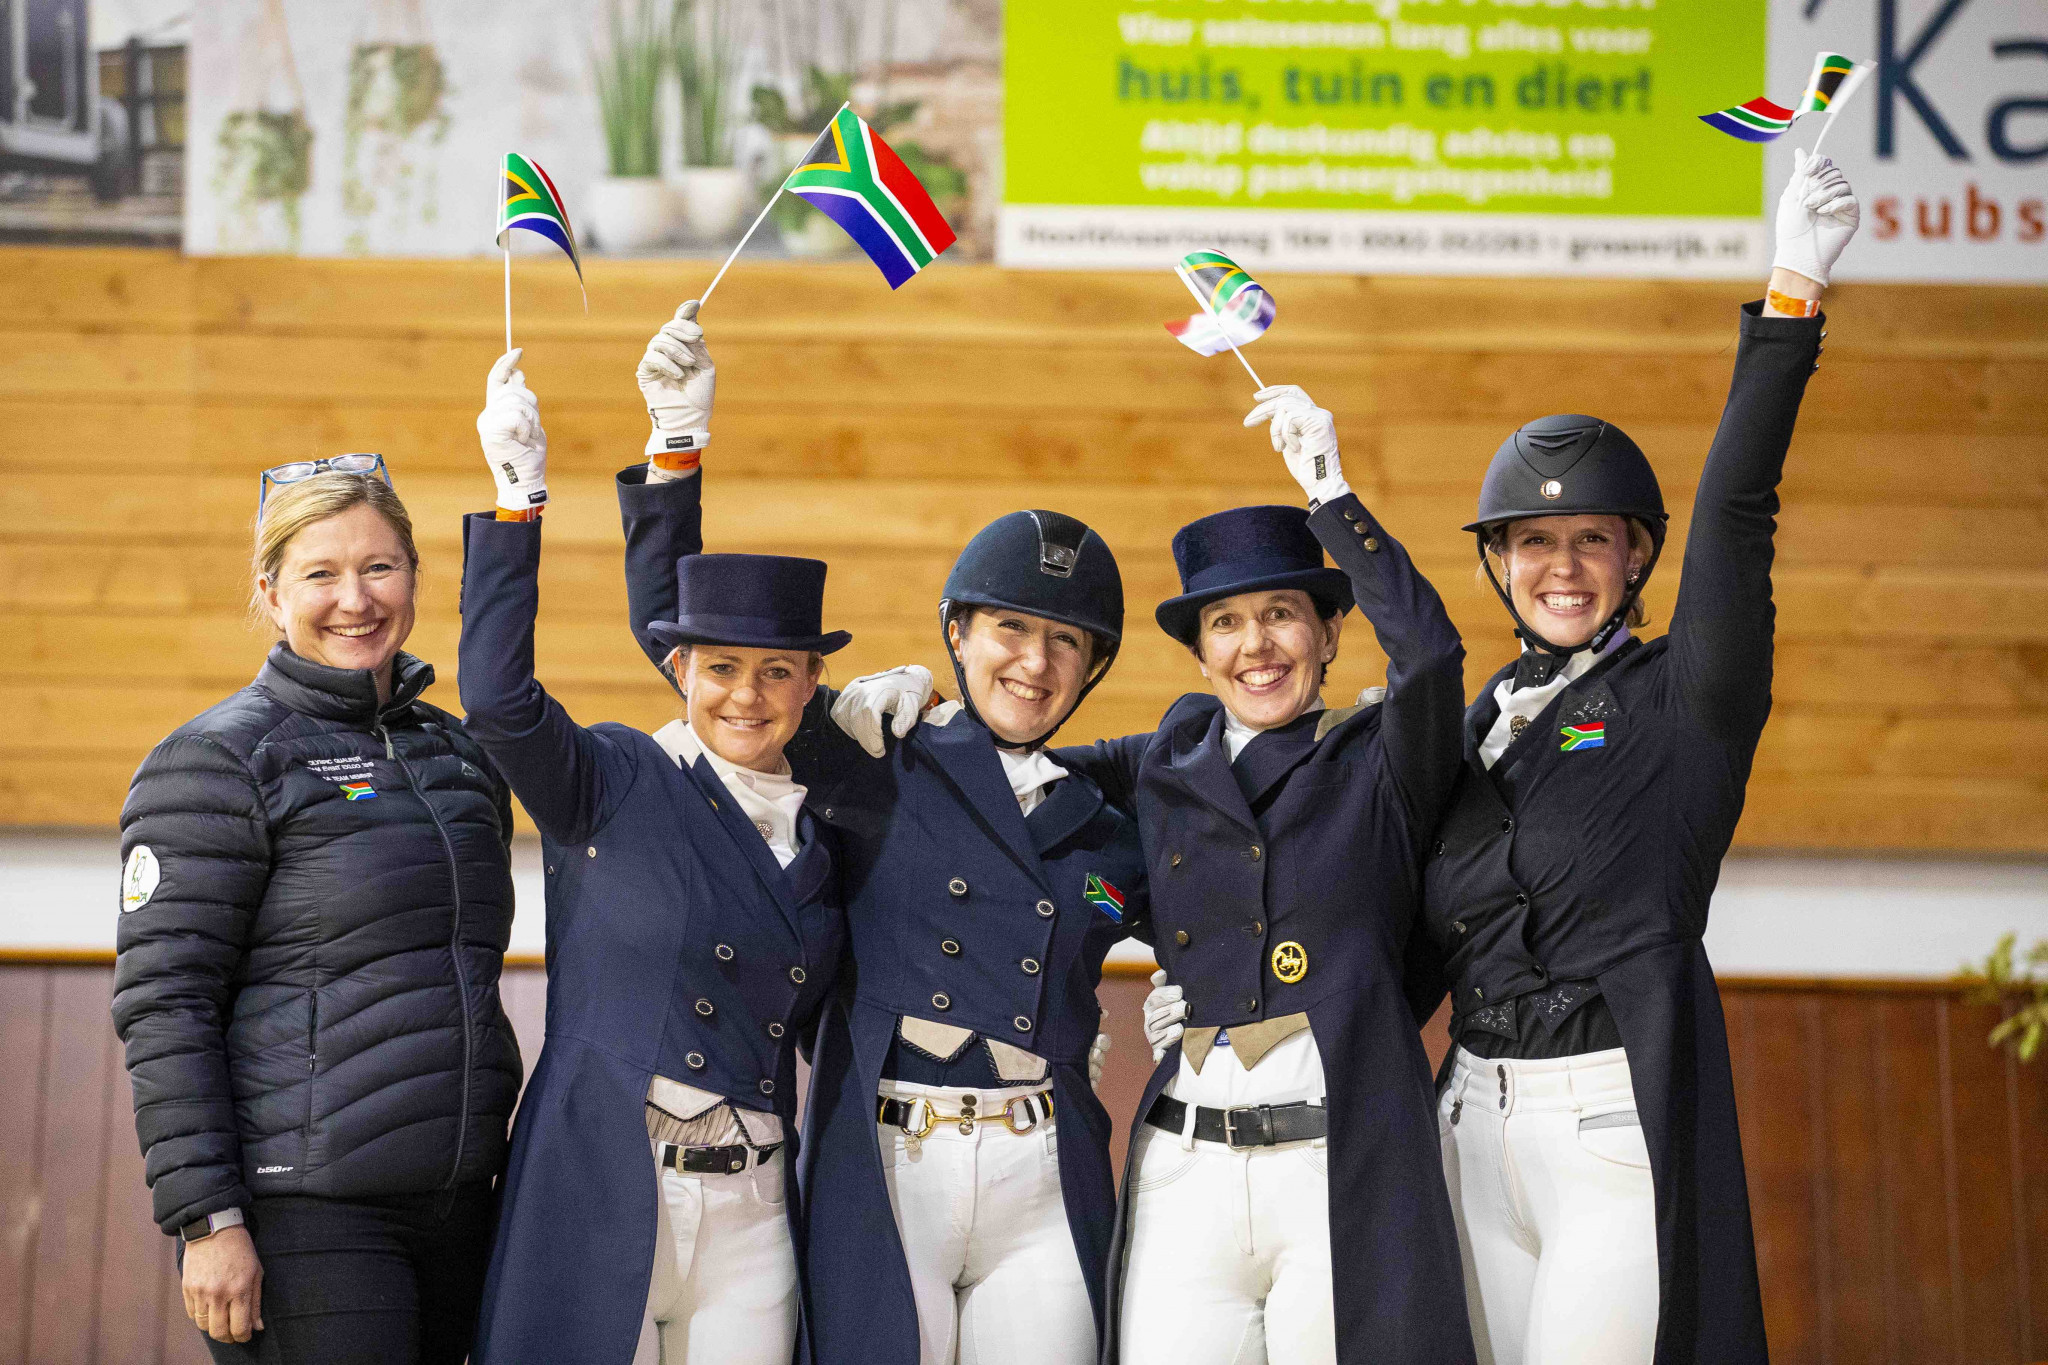 South Africa seal last dressage spot at Tokyo 2020